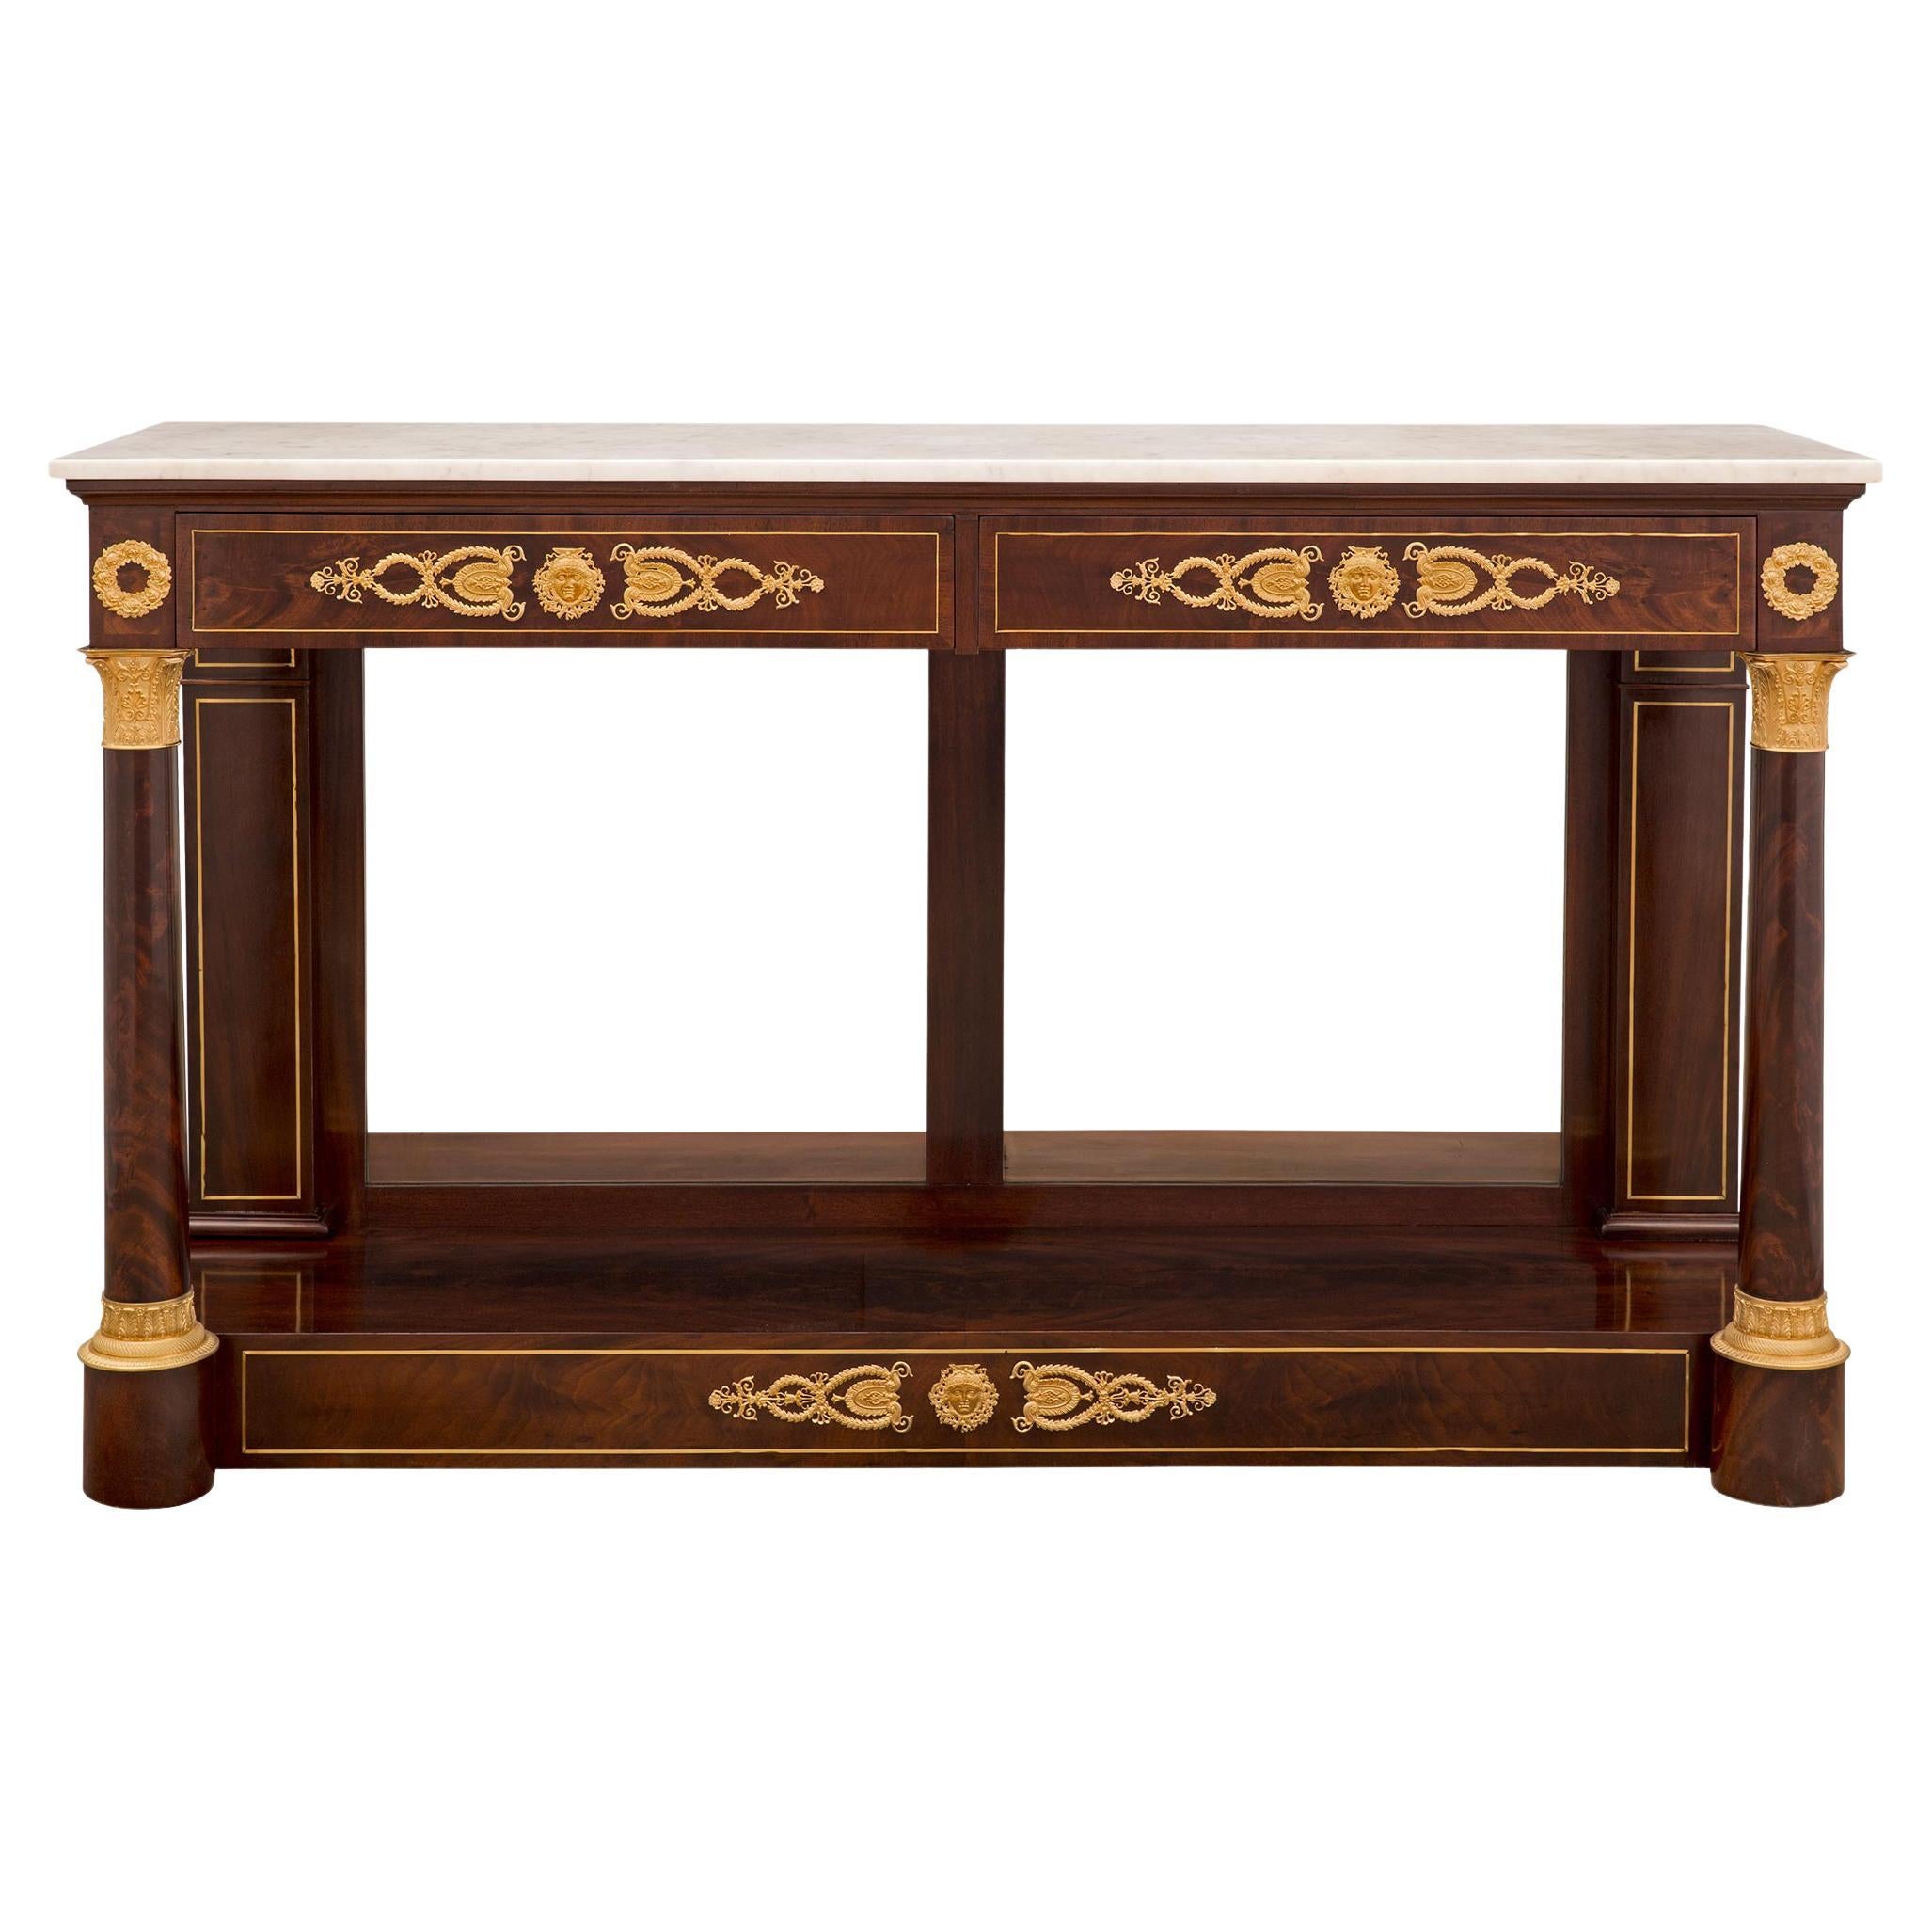 French 19th Century 1st Empire Period Mahogany, Marble, and Ormolu Console